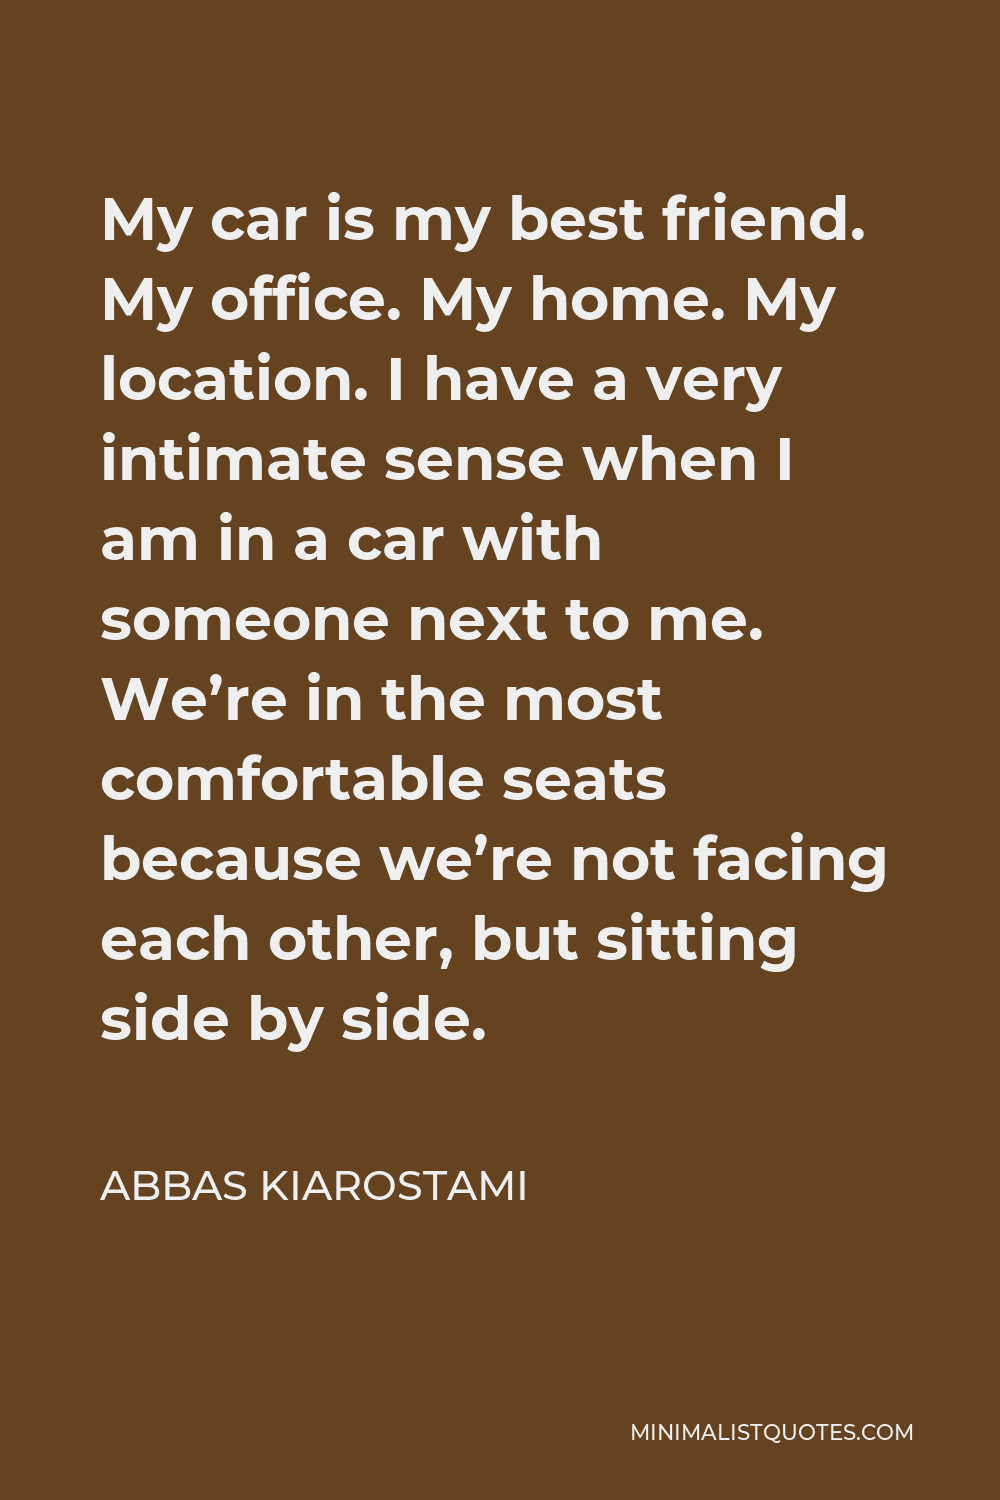 Abbas Kiarostami Quote - My car is my best friend. My office. My home. My location. I have a very intimate sense when I am in a car with someone next to me. We’re in the most comfortable seats because we’re not facing each other, but sitting side by side.